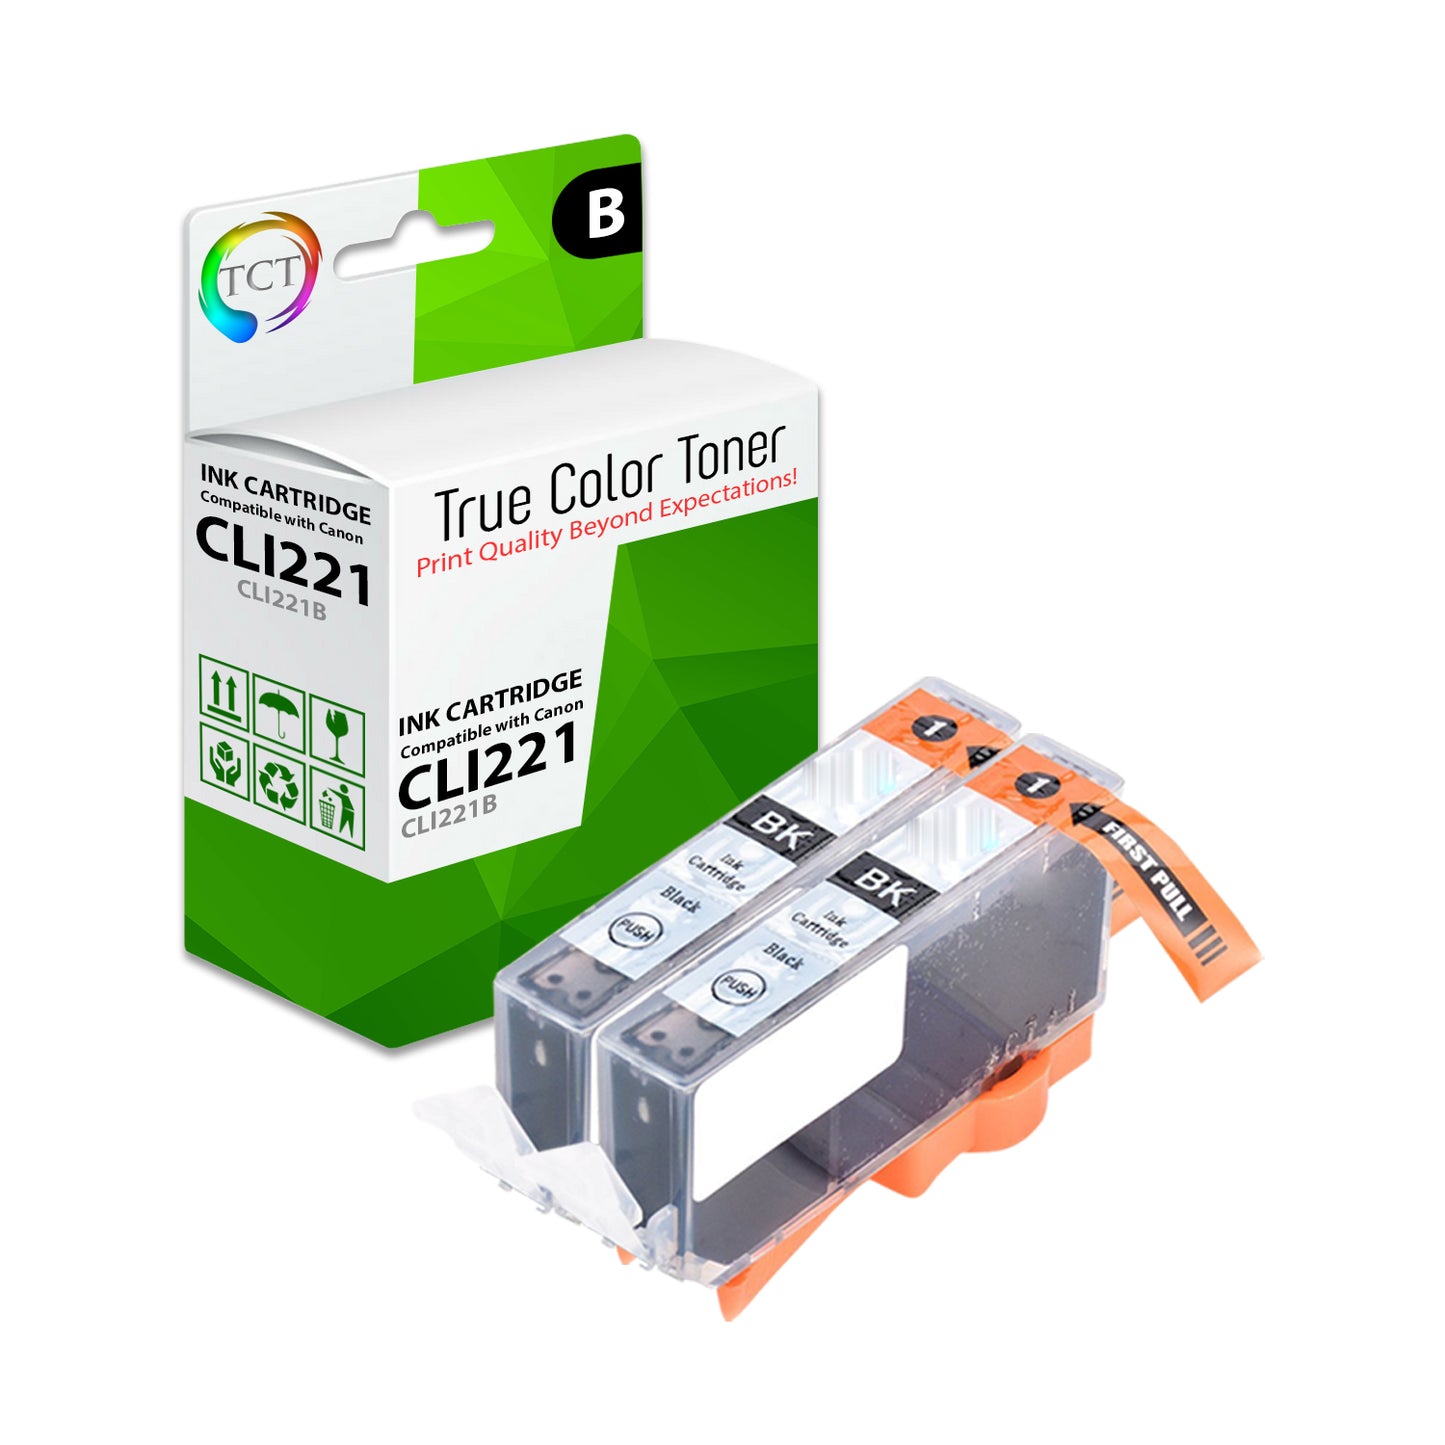 TCT Compatible Ink Cartridge Replacement for the Canon CLI-221 Series - 2 Pack Black